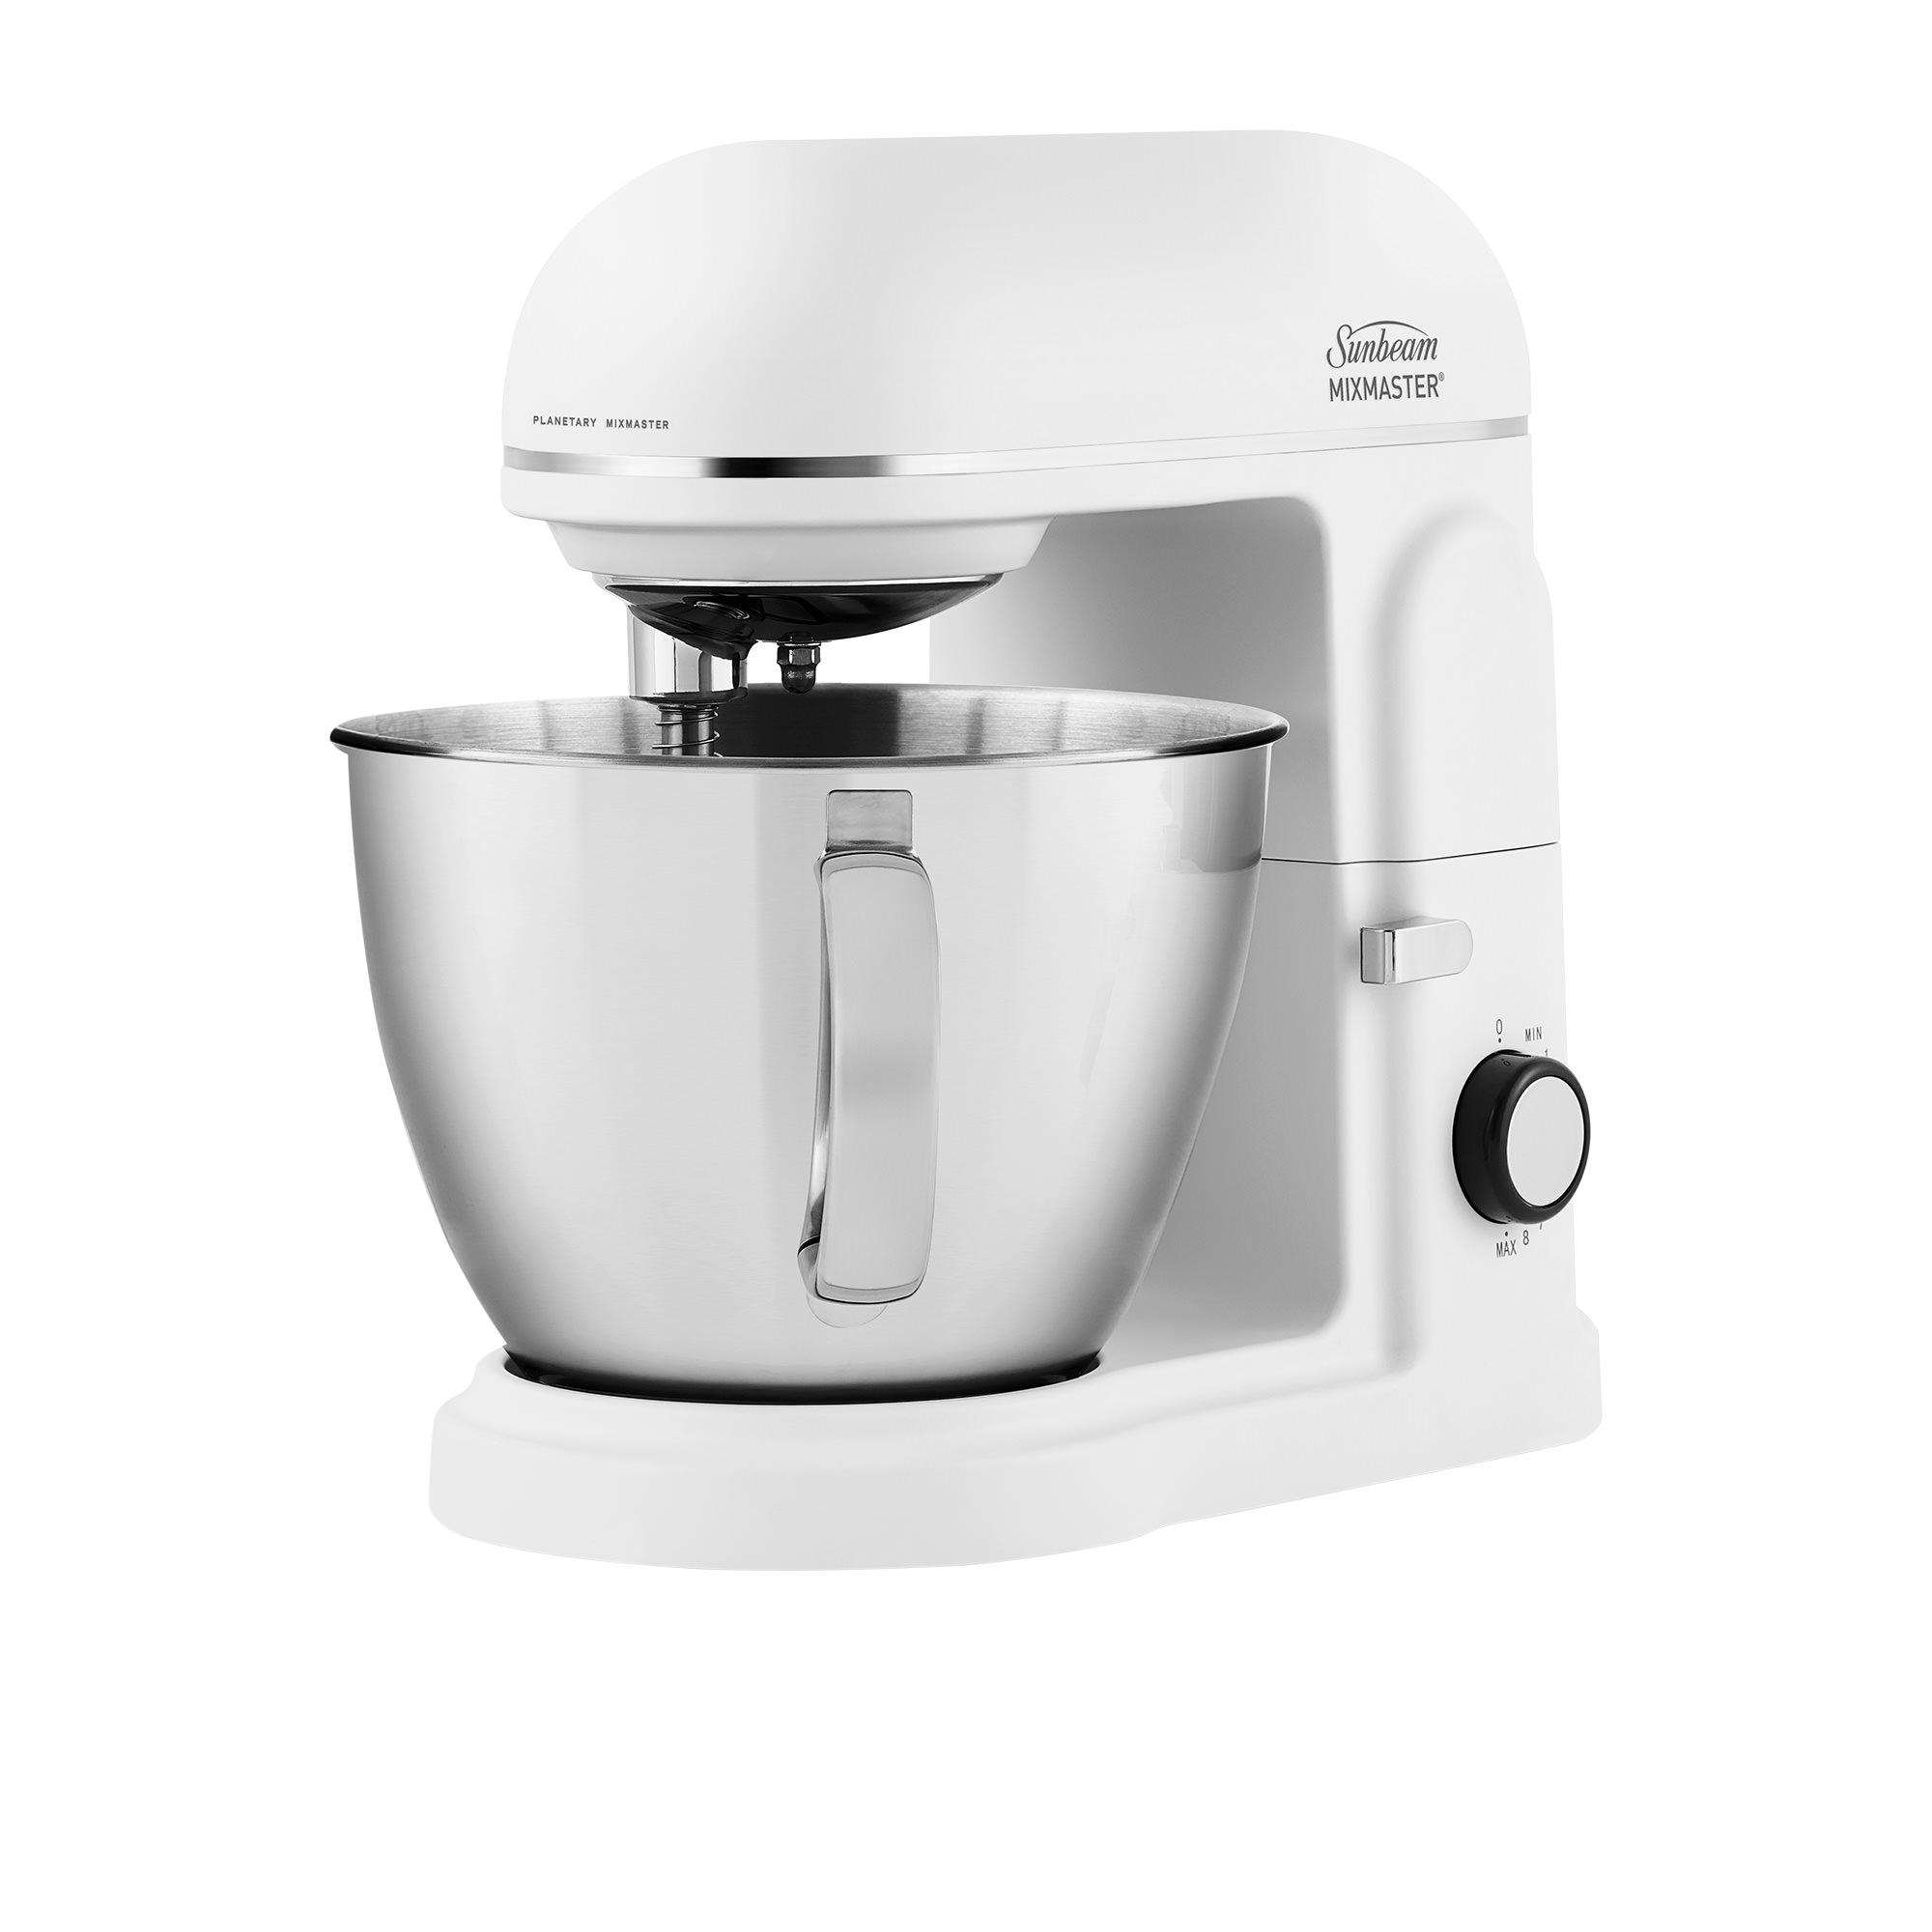 Sunbeam Mixmaster MXM5000WH The Master One Stand Mixer Ocean Mist Image 6